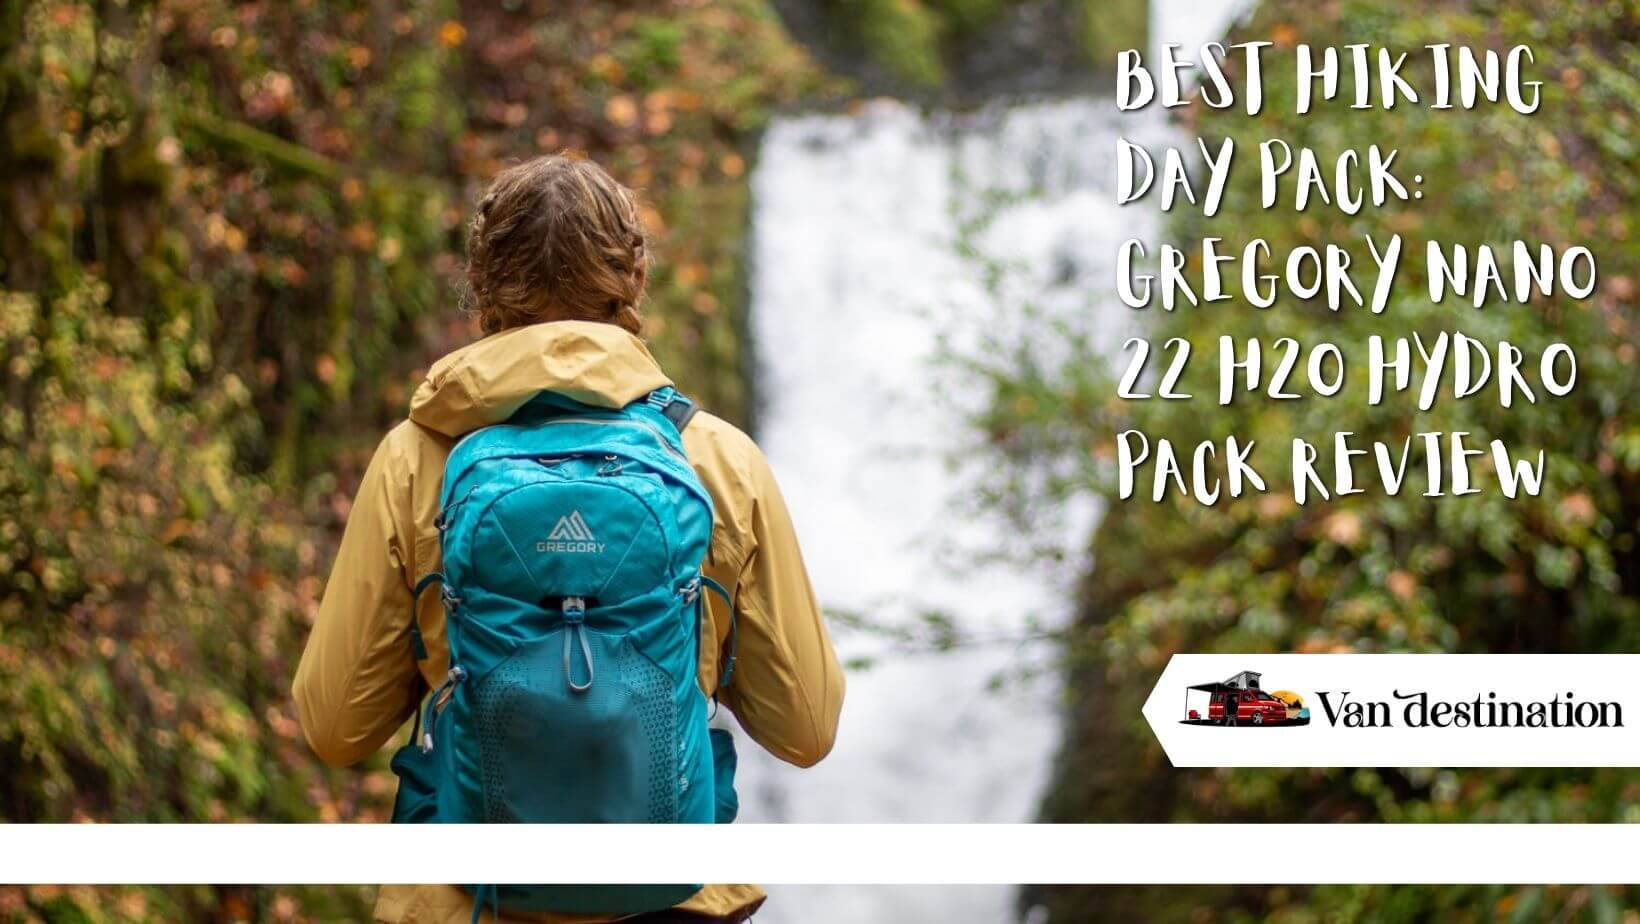 Best Hiking Day Pack: Gregory Nano 22 H2O Hydro Pack Review